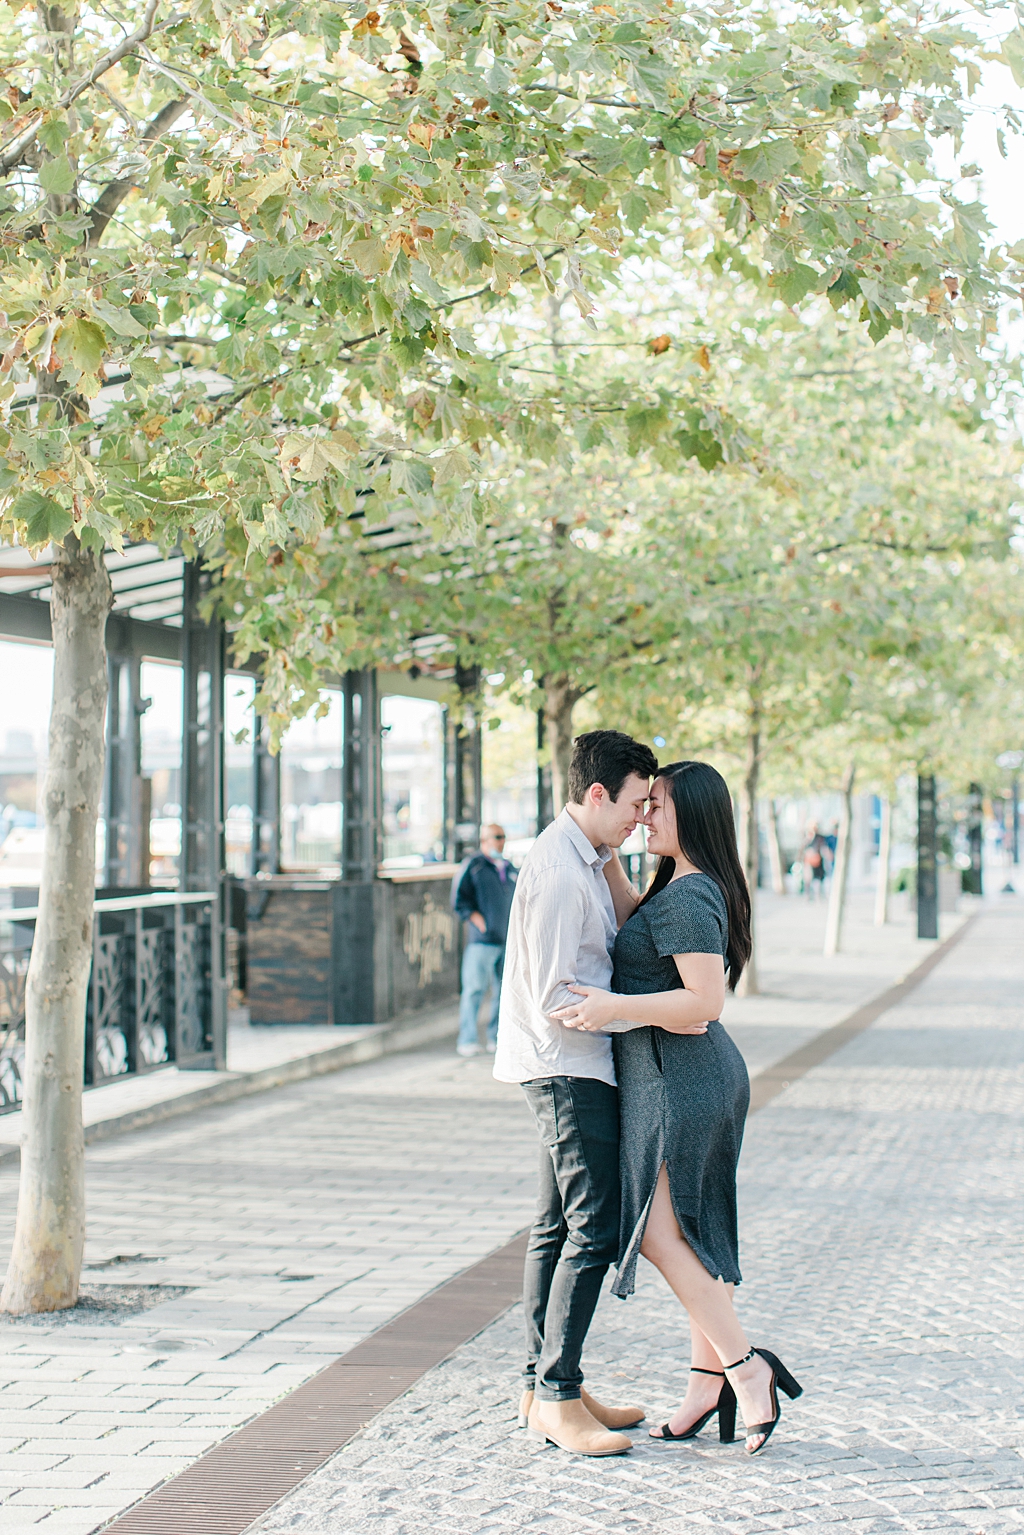 Becky_Collin_Navy_Yards_Park_The_Wharf_Washington_DC_Fall_Engagement_Session_AngelikaJohnsPhotography-7601.jpg